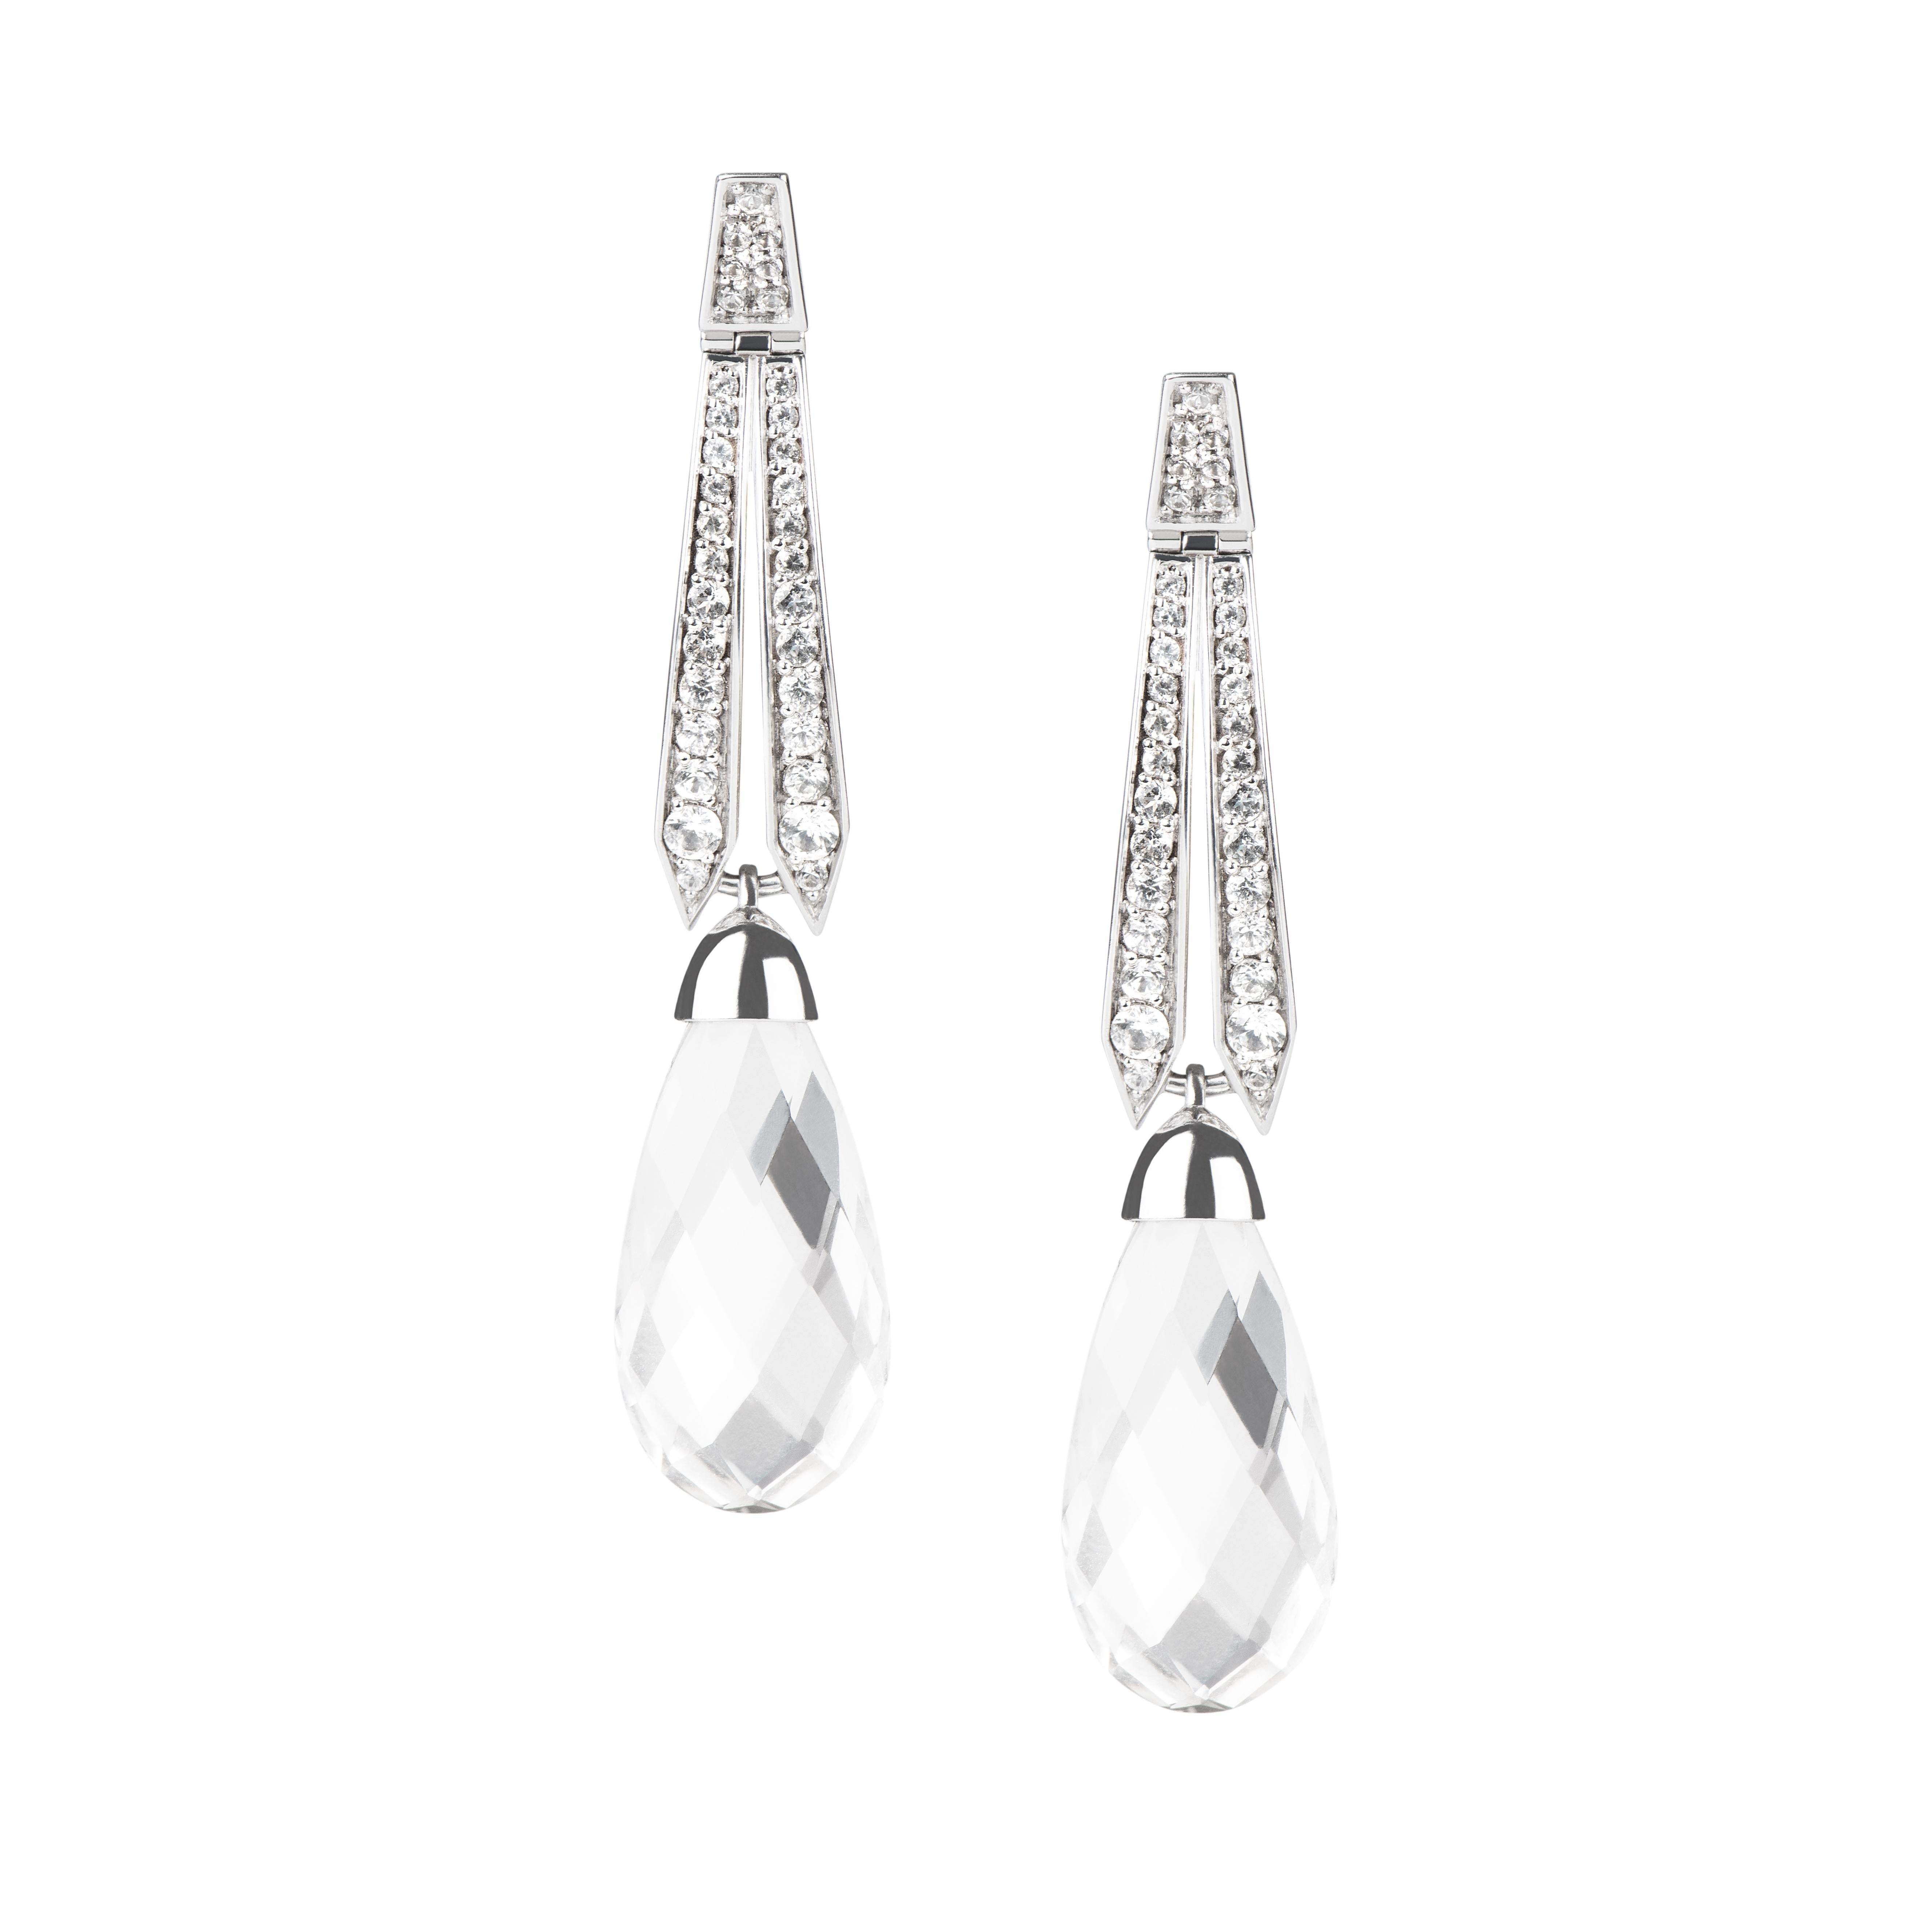 Aesthetic Movement Eliania Rosetti Earrings in 18k Gold 36.4 Cts of White Topaz  25.7 Cts Red Jade For Sale